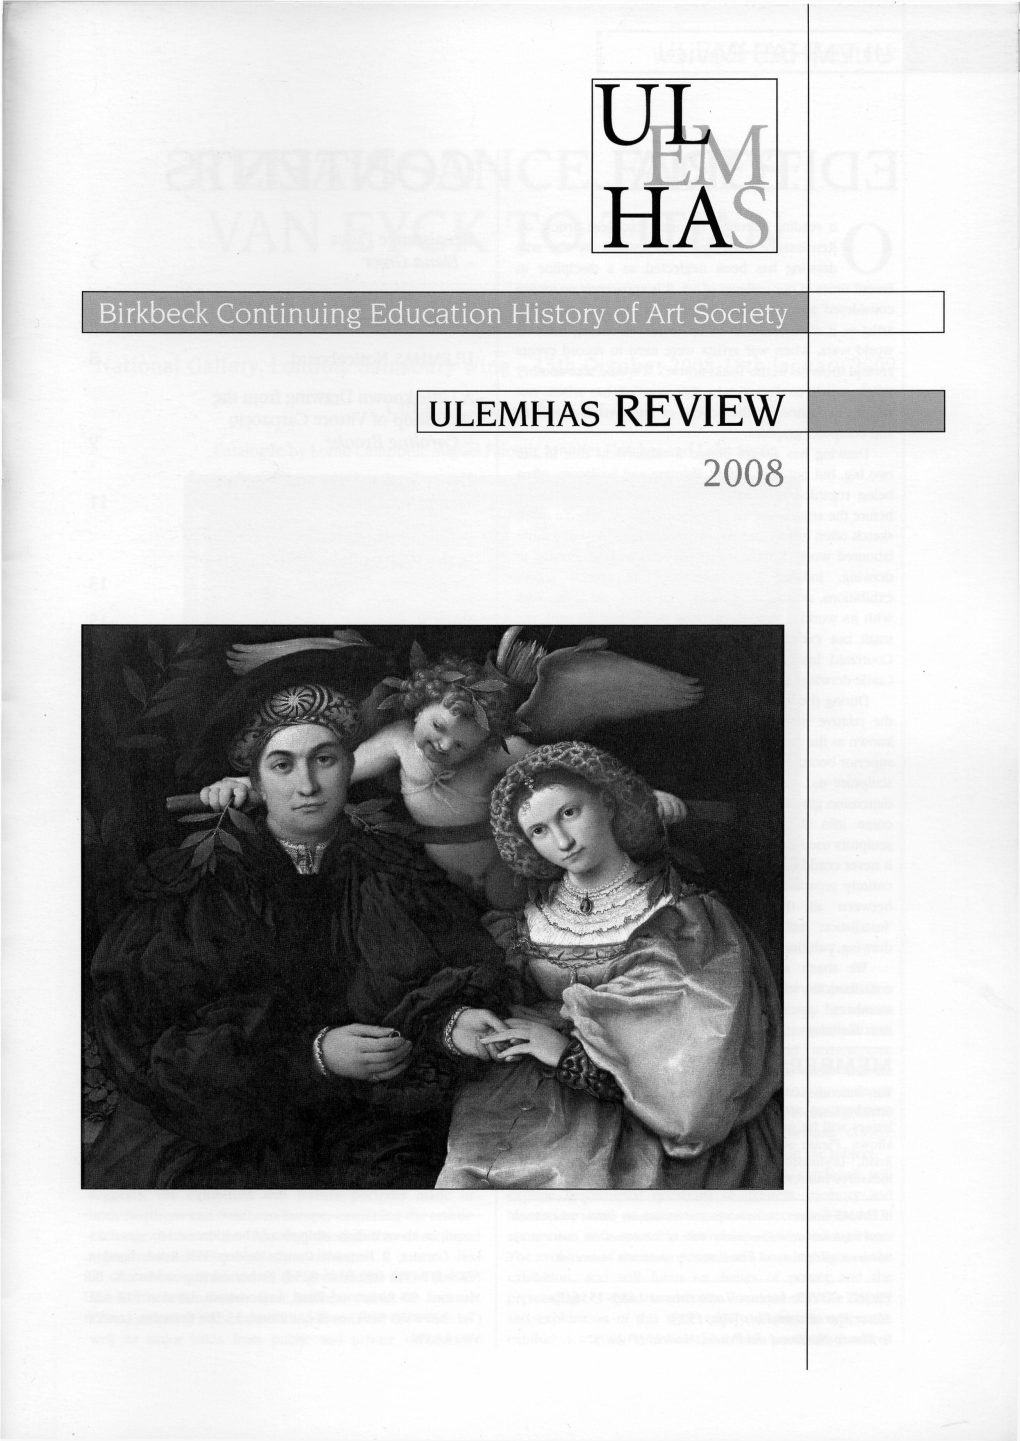 ULEMHAS Review 2008